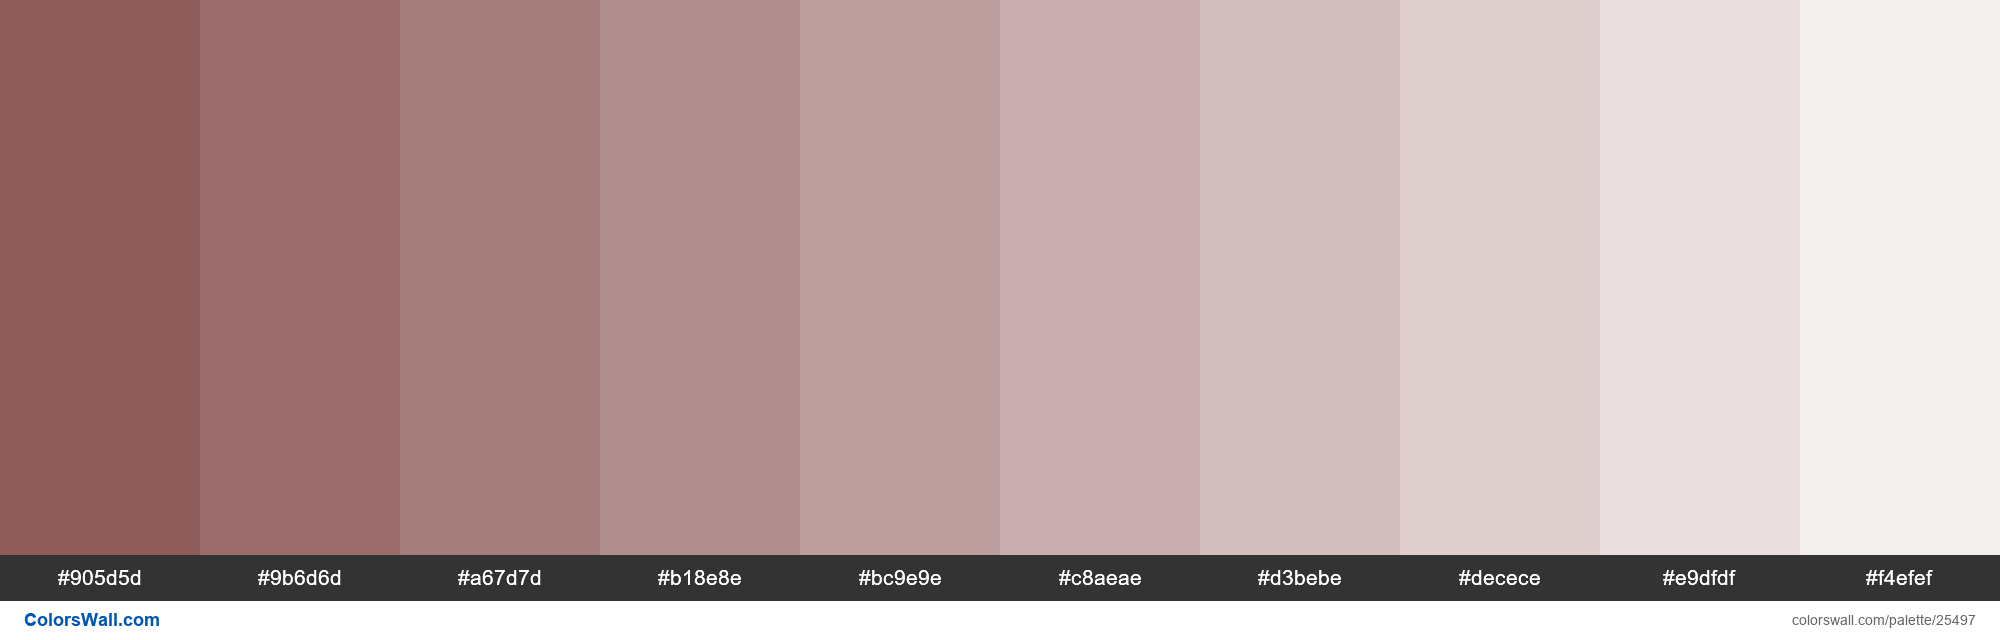 Tints of Rose Taupe color #905D5D hex - ColorsWall